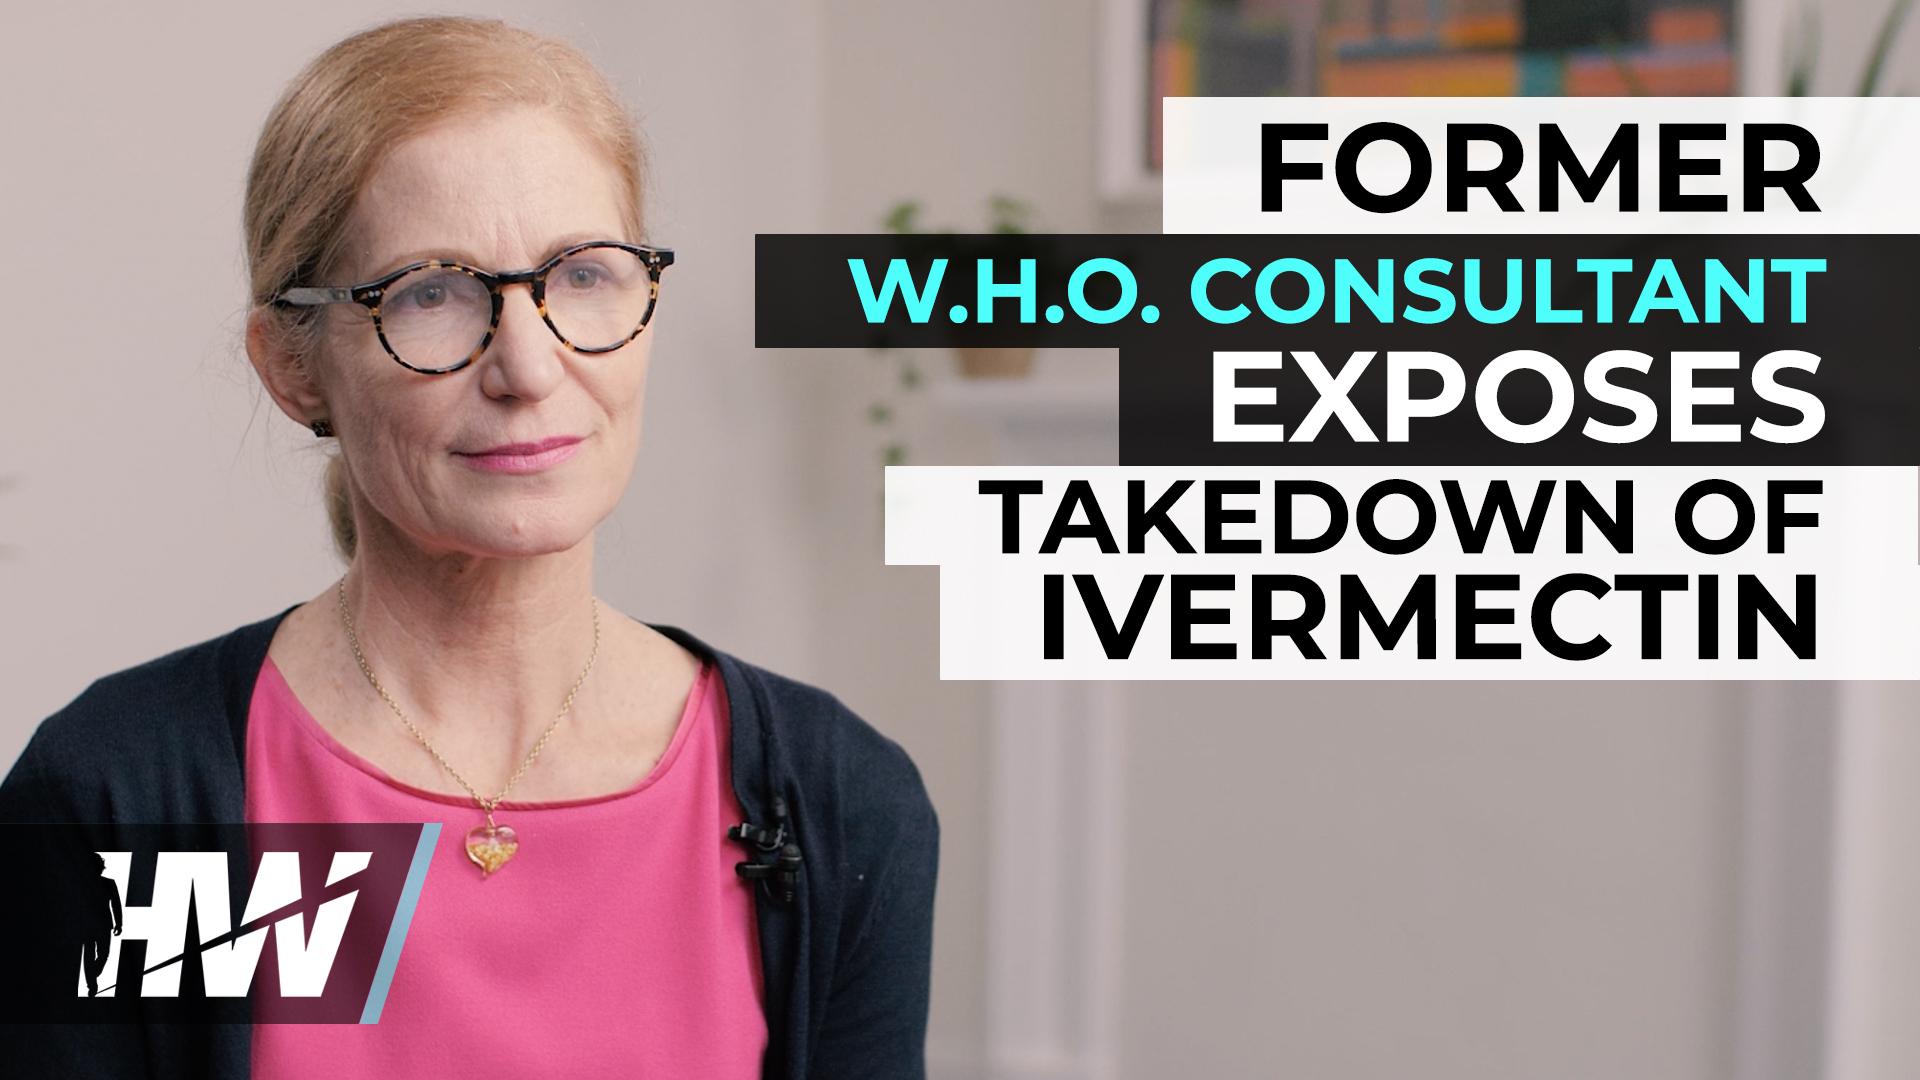 FORMER W.H.O. CONSULTANT EXPOSES TAKEDOWN OF IVERMECTIN